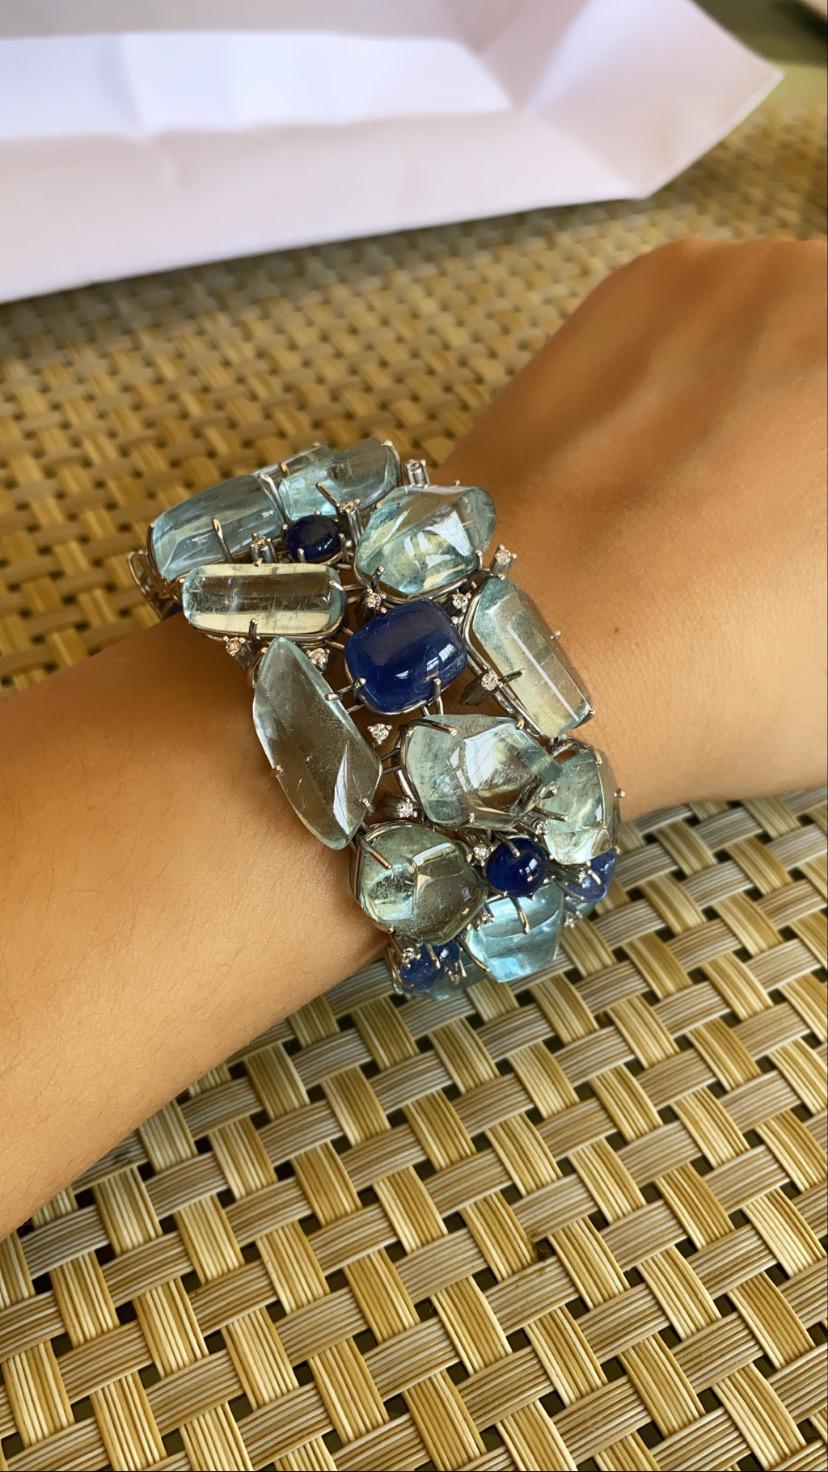 A gorgeous and modern bracelet set in 18k white gold with Natural aquamarine cabs and natural blue sapphire cabs with diamonds. The aquamarine weight is 149.15 carats and blue sapphire weight is 35.79 carats, diamond weight is .77 carats . The net